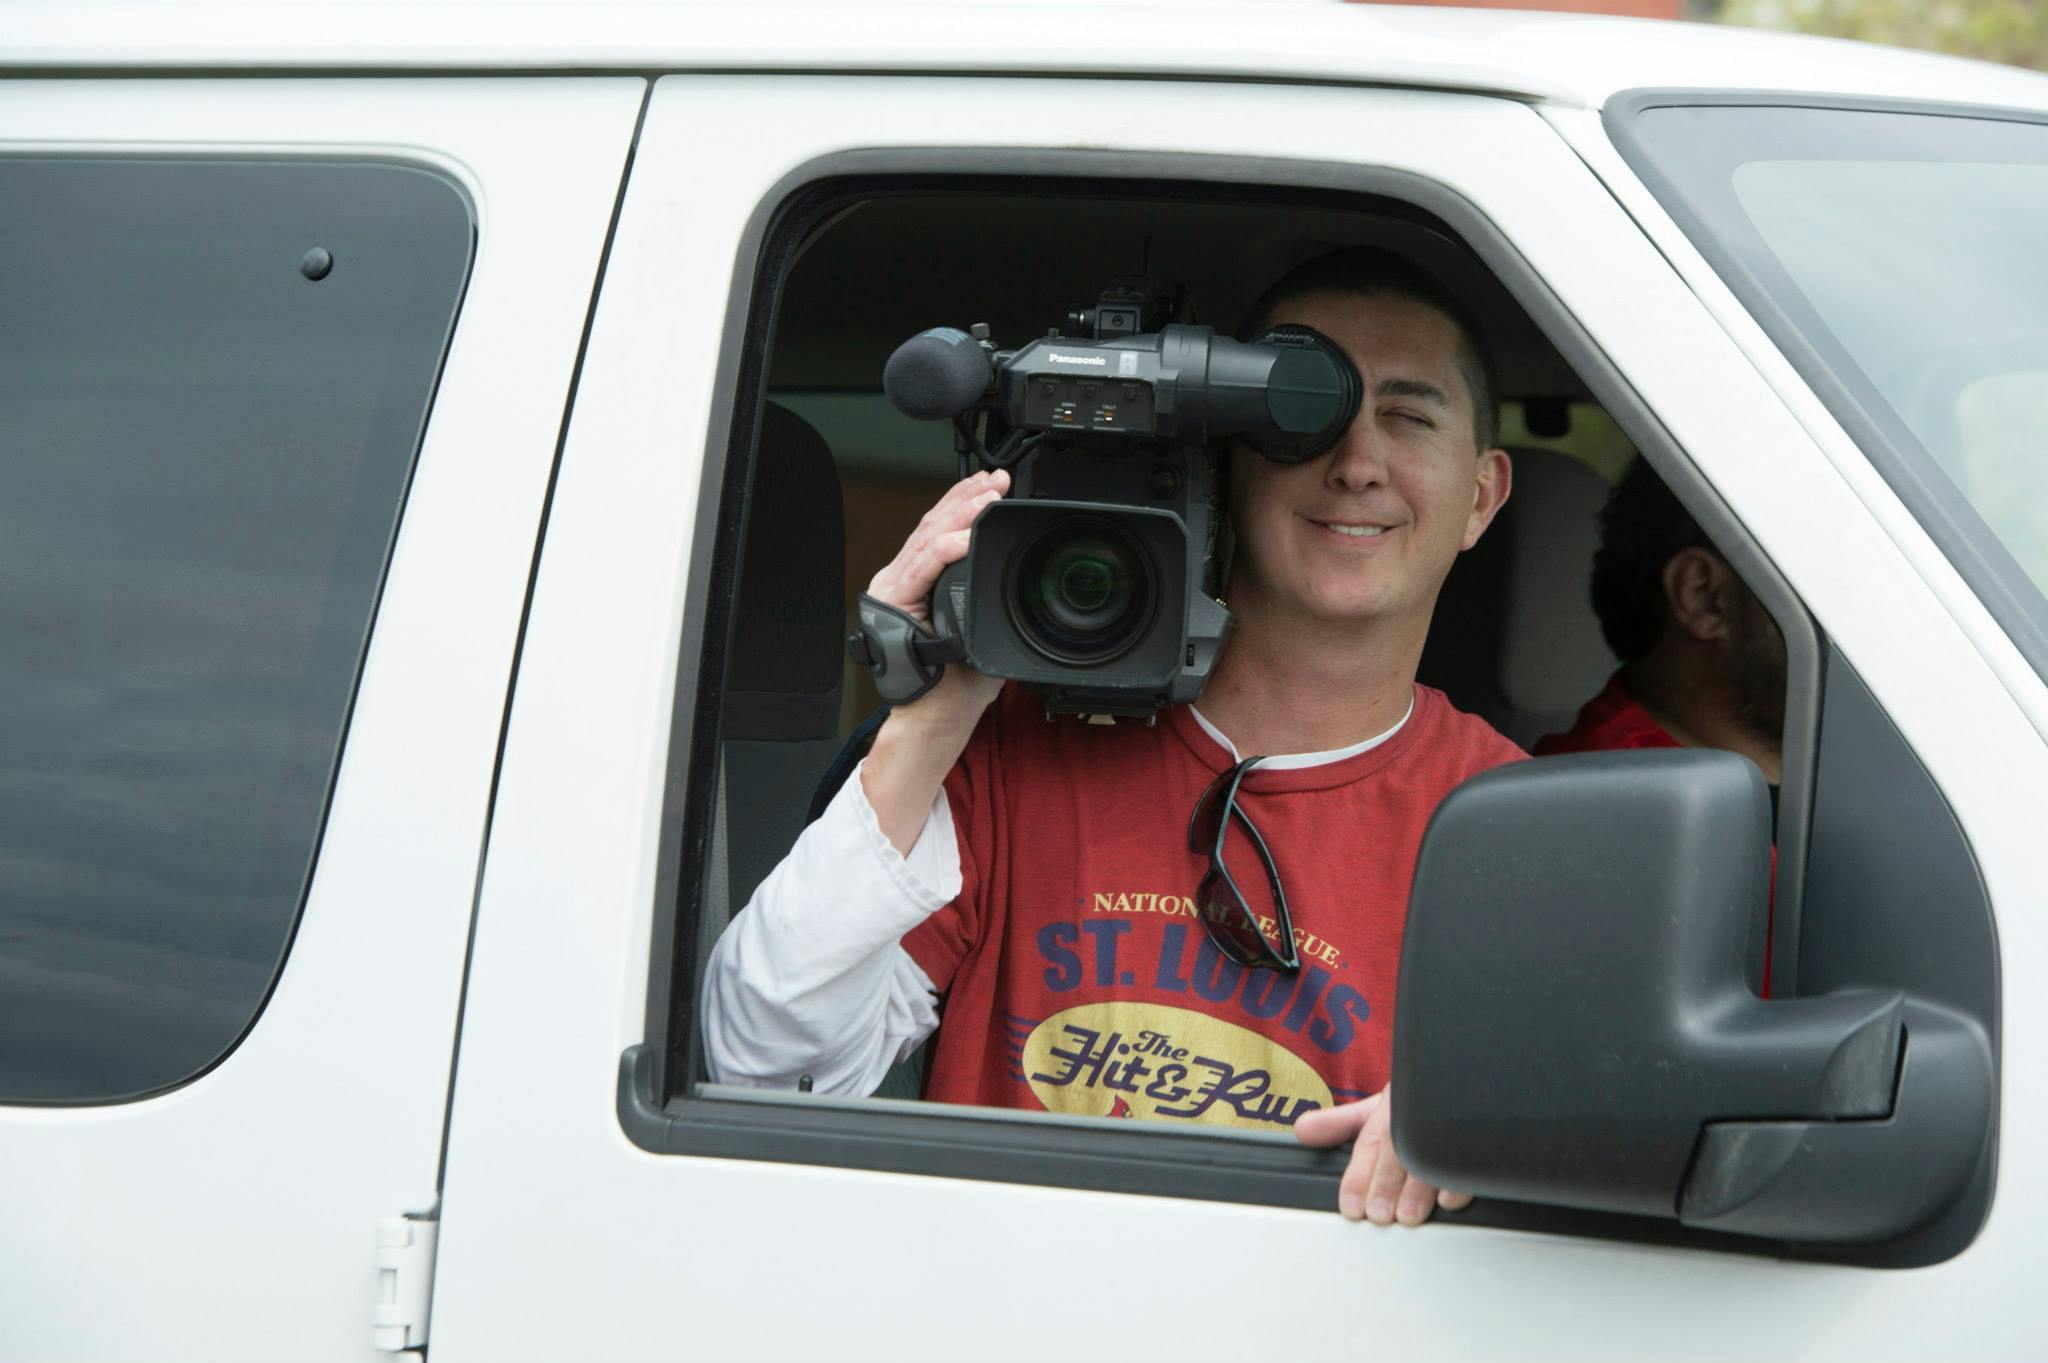 Mike in van with camera